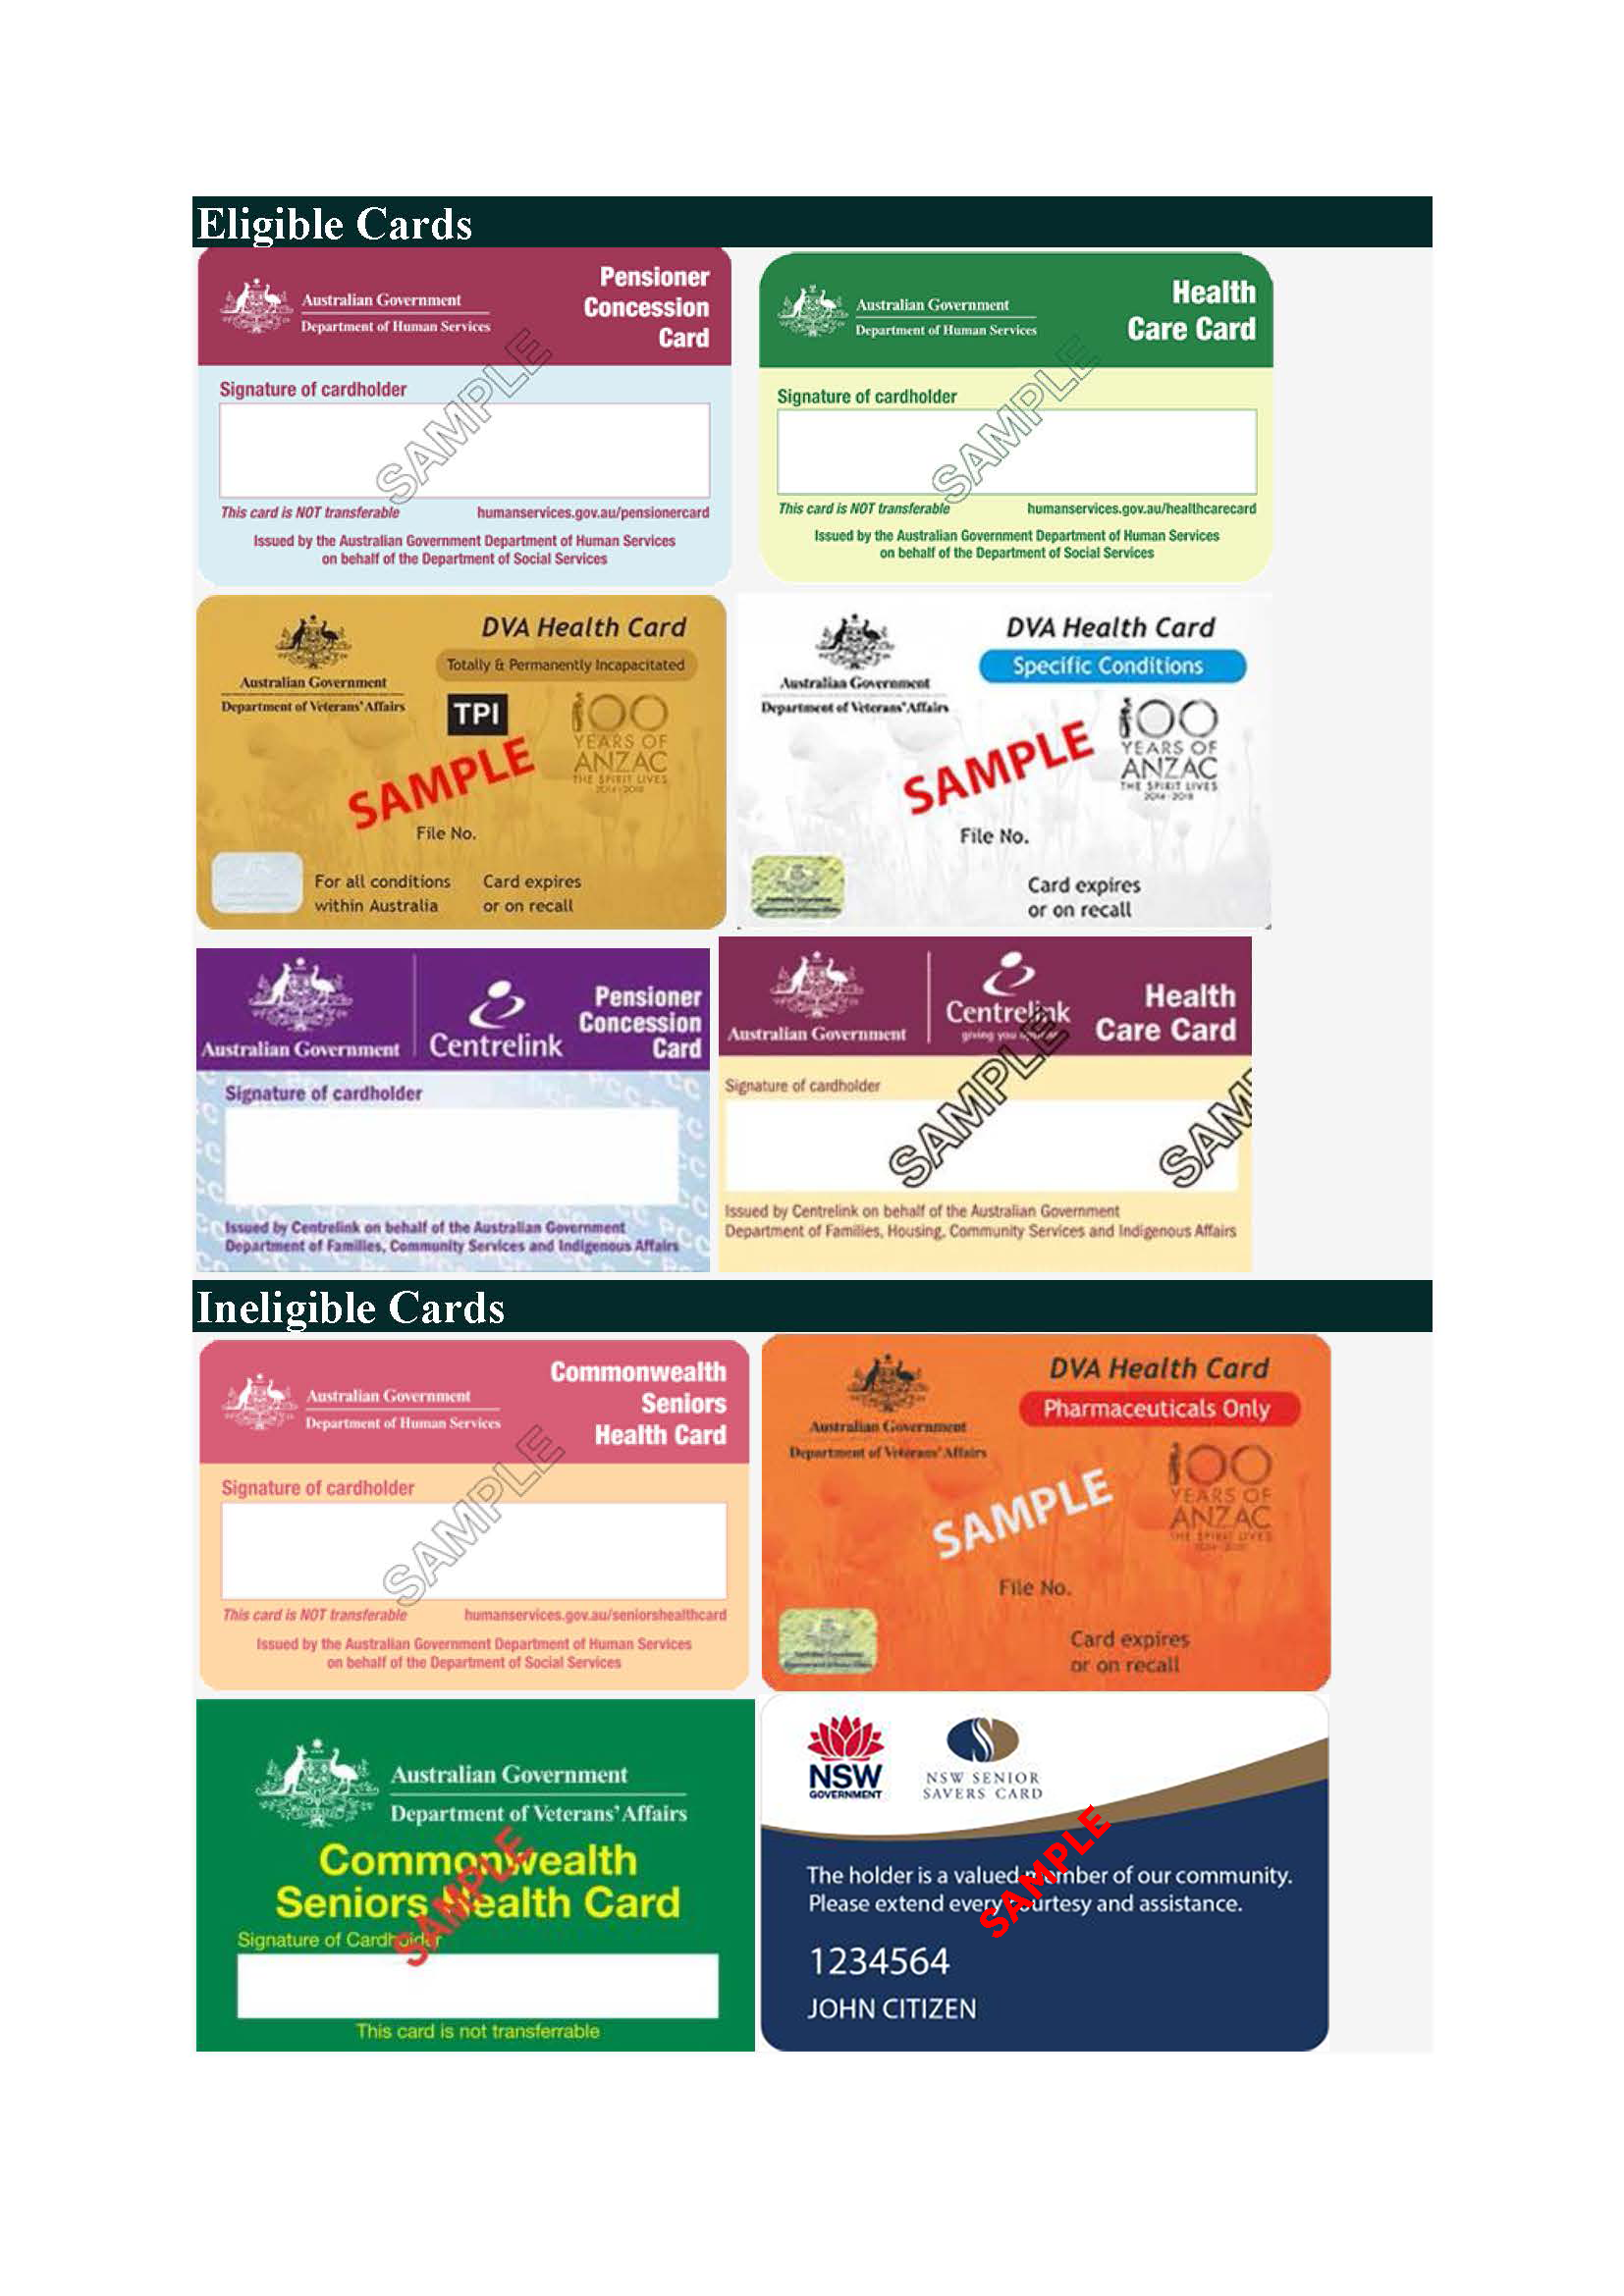 Eligible cards: Pensioner Concession card, Health Care Card, DVA Health Card Ineligible cards: Commonwealth Seniors Health Card, DVA Health Card (Pharmaceuticals only), NSW Seniors Card